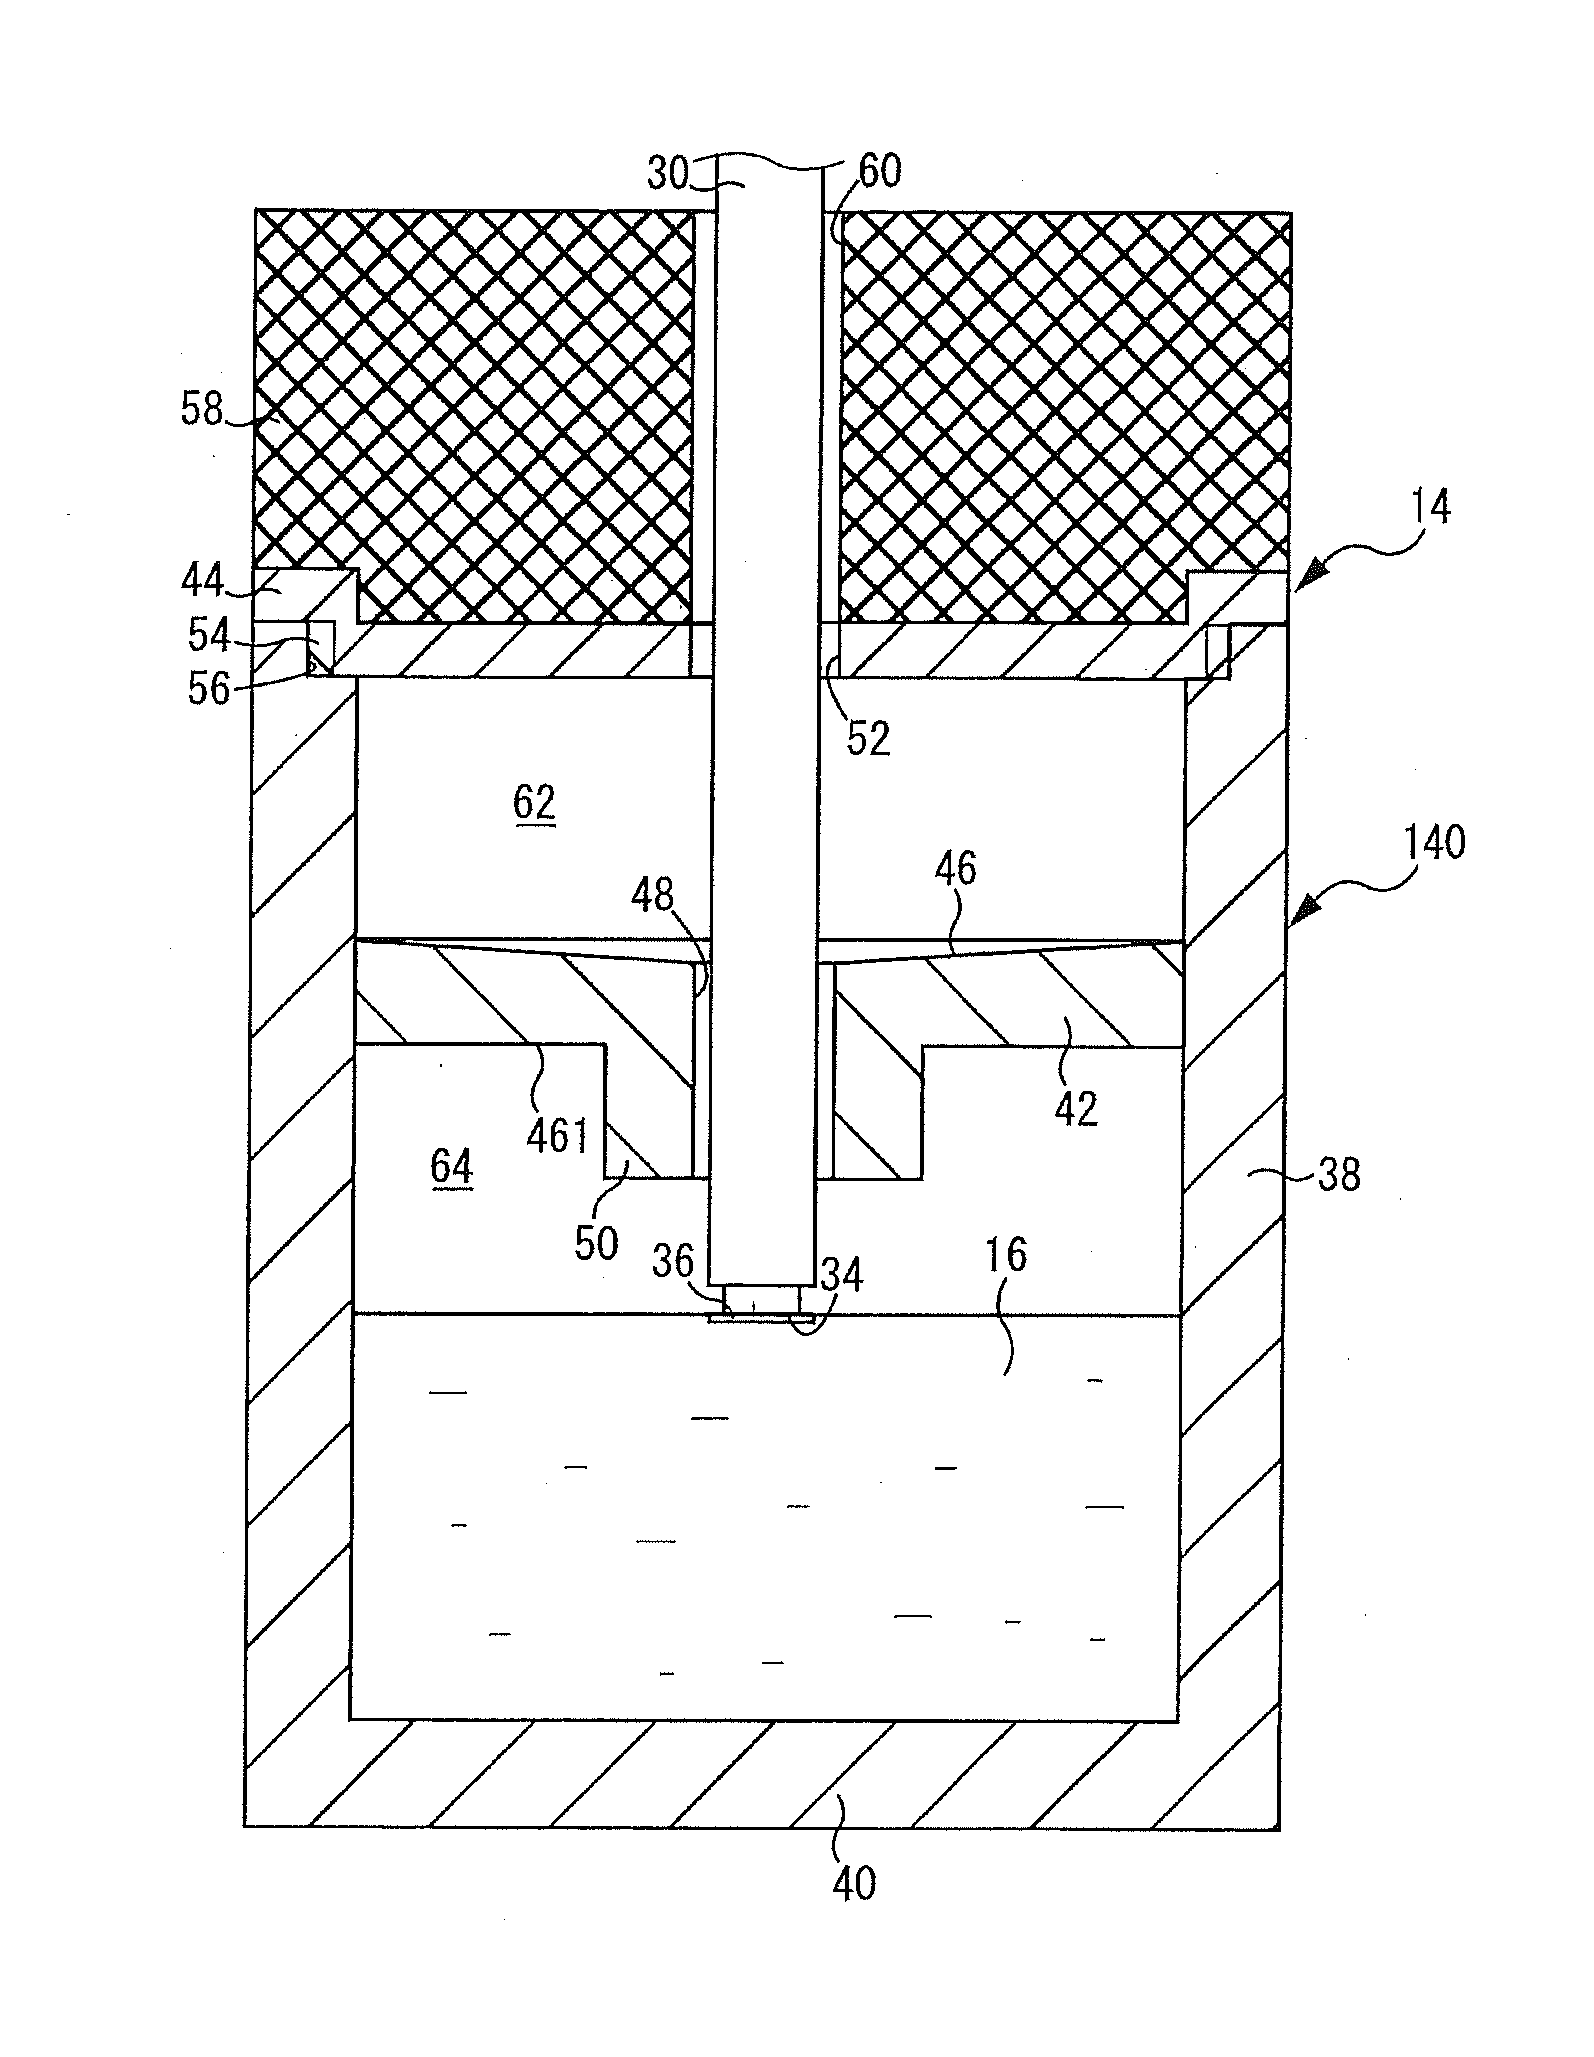 PRODUCTION APPARATUS OF SiC SINGLE CRYSTAL BY SOLUTION GROWTH METHOD, METHOD FOR PRODUCING SiC SINGLE CRYSTAL USING THE PRODUCTION APPARATUS, AND CRUCIBLE USED IN THE PRODUCTION APPARATUS